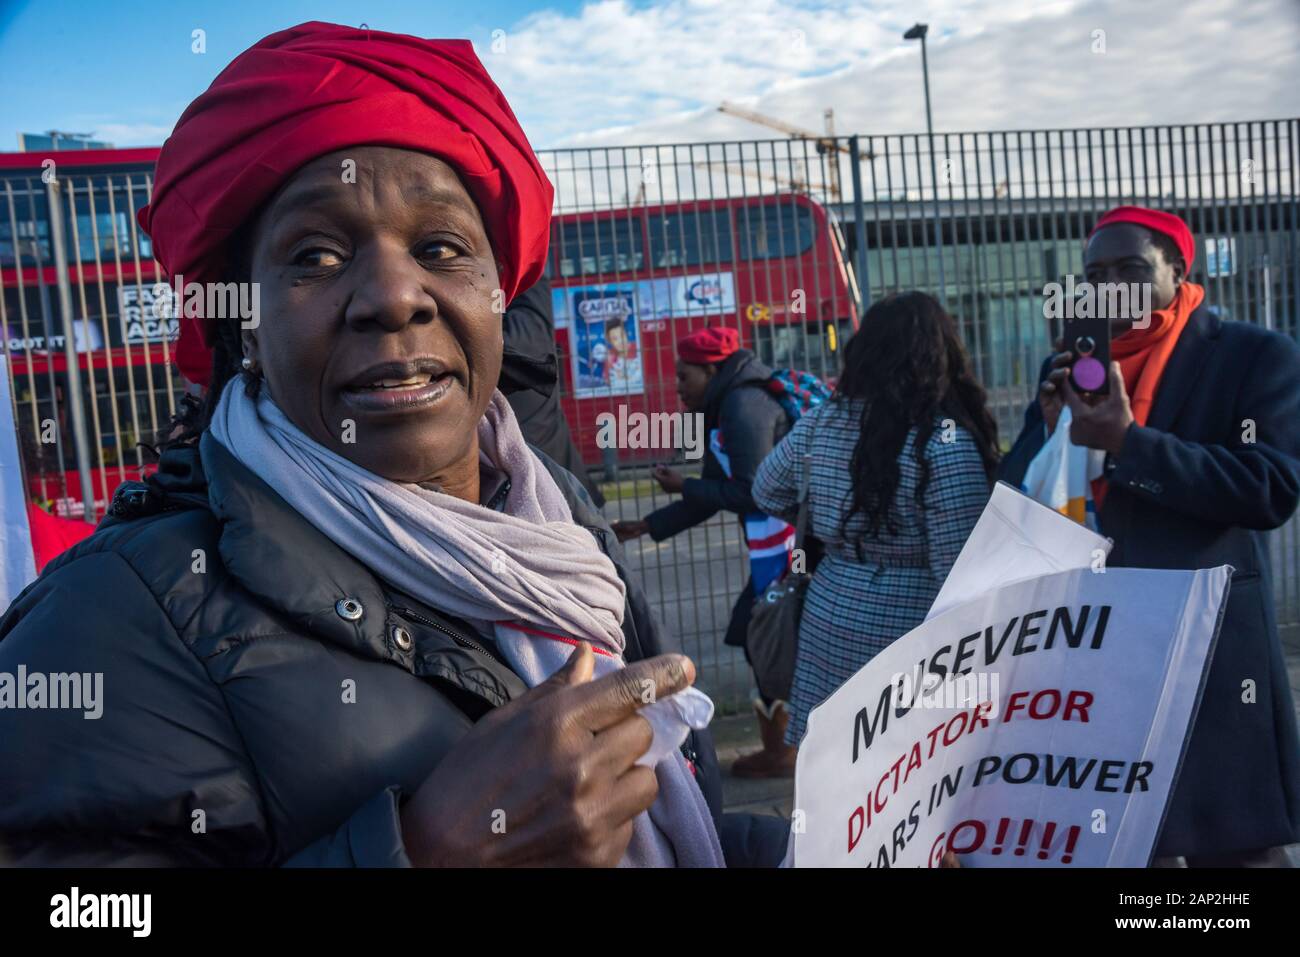 London, UK. 20th January 2020. Ugandans protest against President Yoweri Museveni at the UK-Africa Investment Summit in North Greenwich. Museveni has been in office since 1986, overturning the constitution allowing only two terms in office and has pushed through an act removing the age cap and increasing the term of office from 5 to 7 years for next year's elections. This has led to widespread protests inside his own party and by the opposition. The country suffers from high levels of corruption, unemployment and poverty. Peter Marshall/Alamy Live News Stock Photo